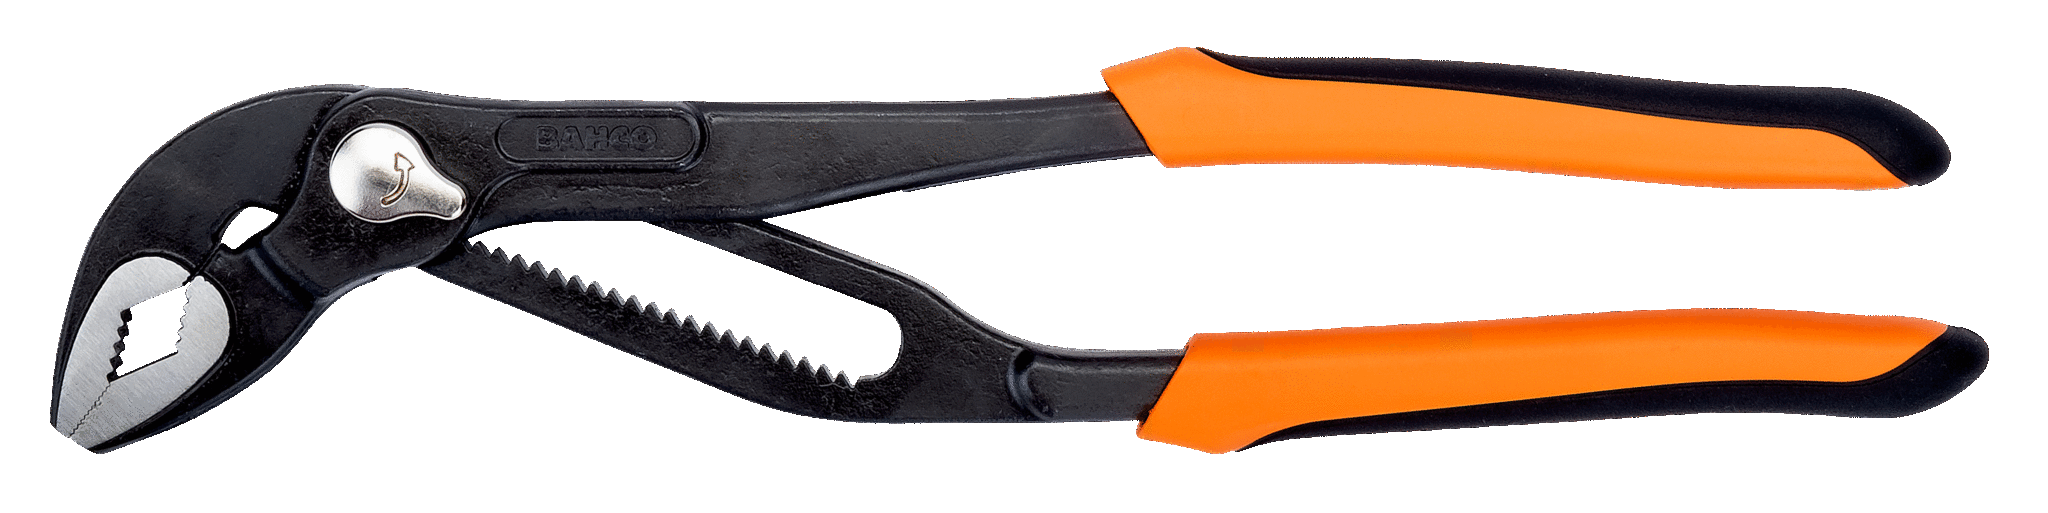 Quick Adjust Slip Joint Water Pump Pliers with Phosphate Finish - 7225 by Bahco